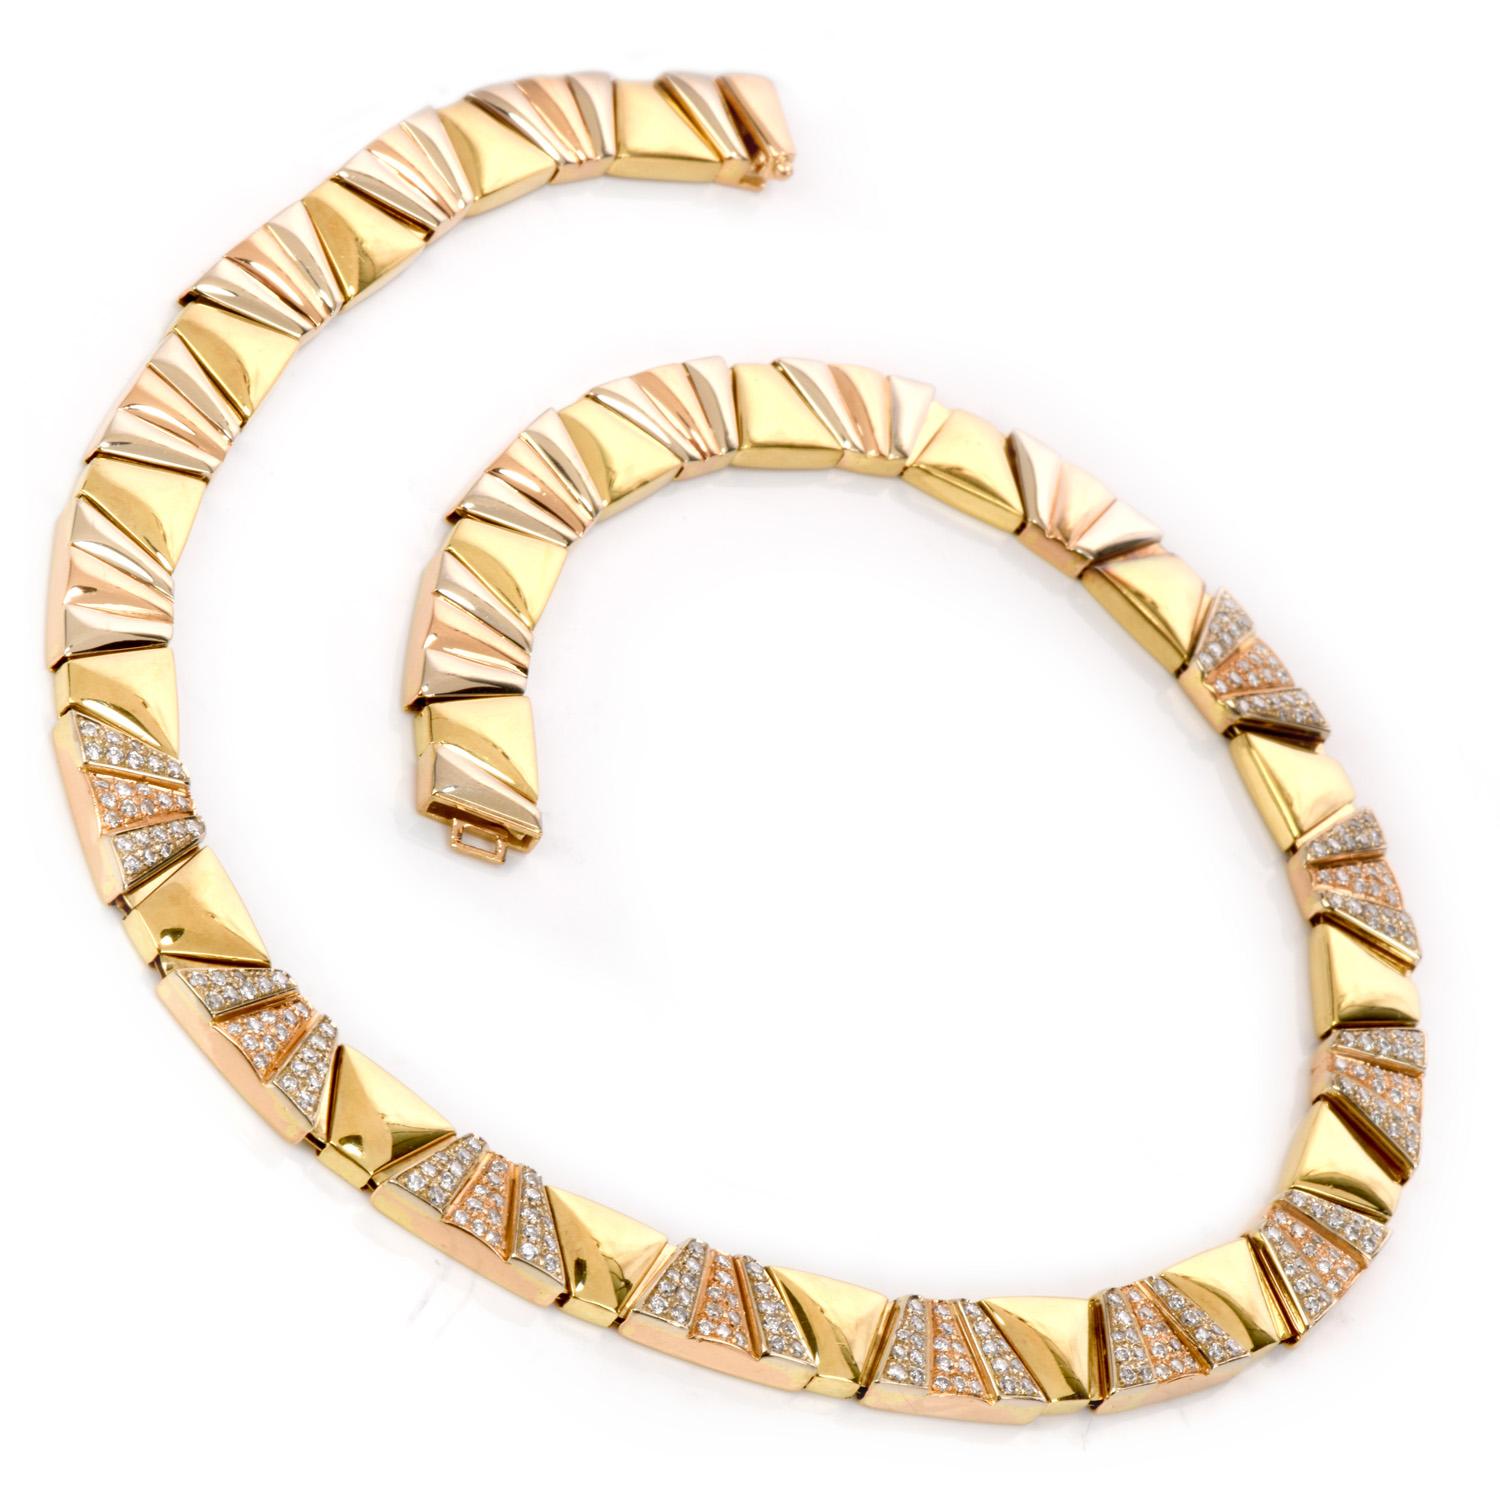 This classically Chimento necklace with pave diamonds is crafted in solid18-karat tri color gold, weighing 85.3 grams and measuring 17 inches long x 10 mm wide.

The necklace incorporates an assemblage of triangular-formatted profiles inversely